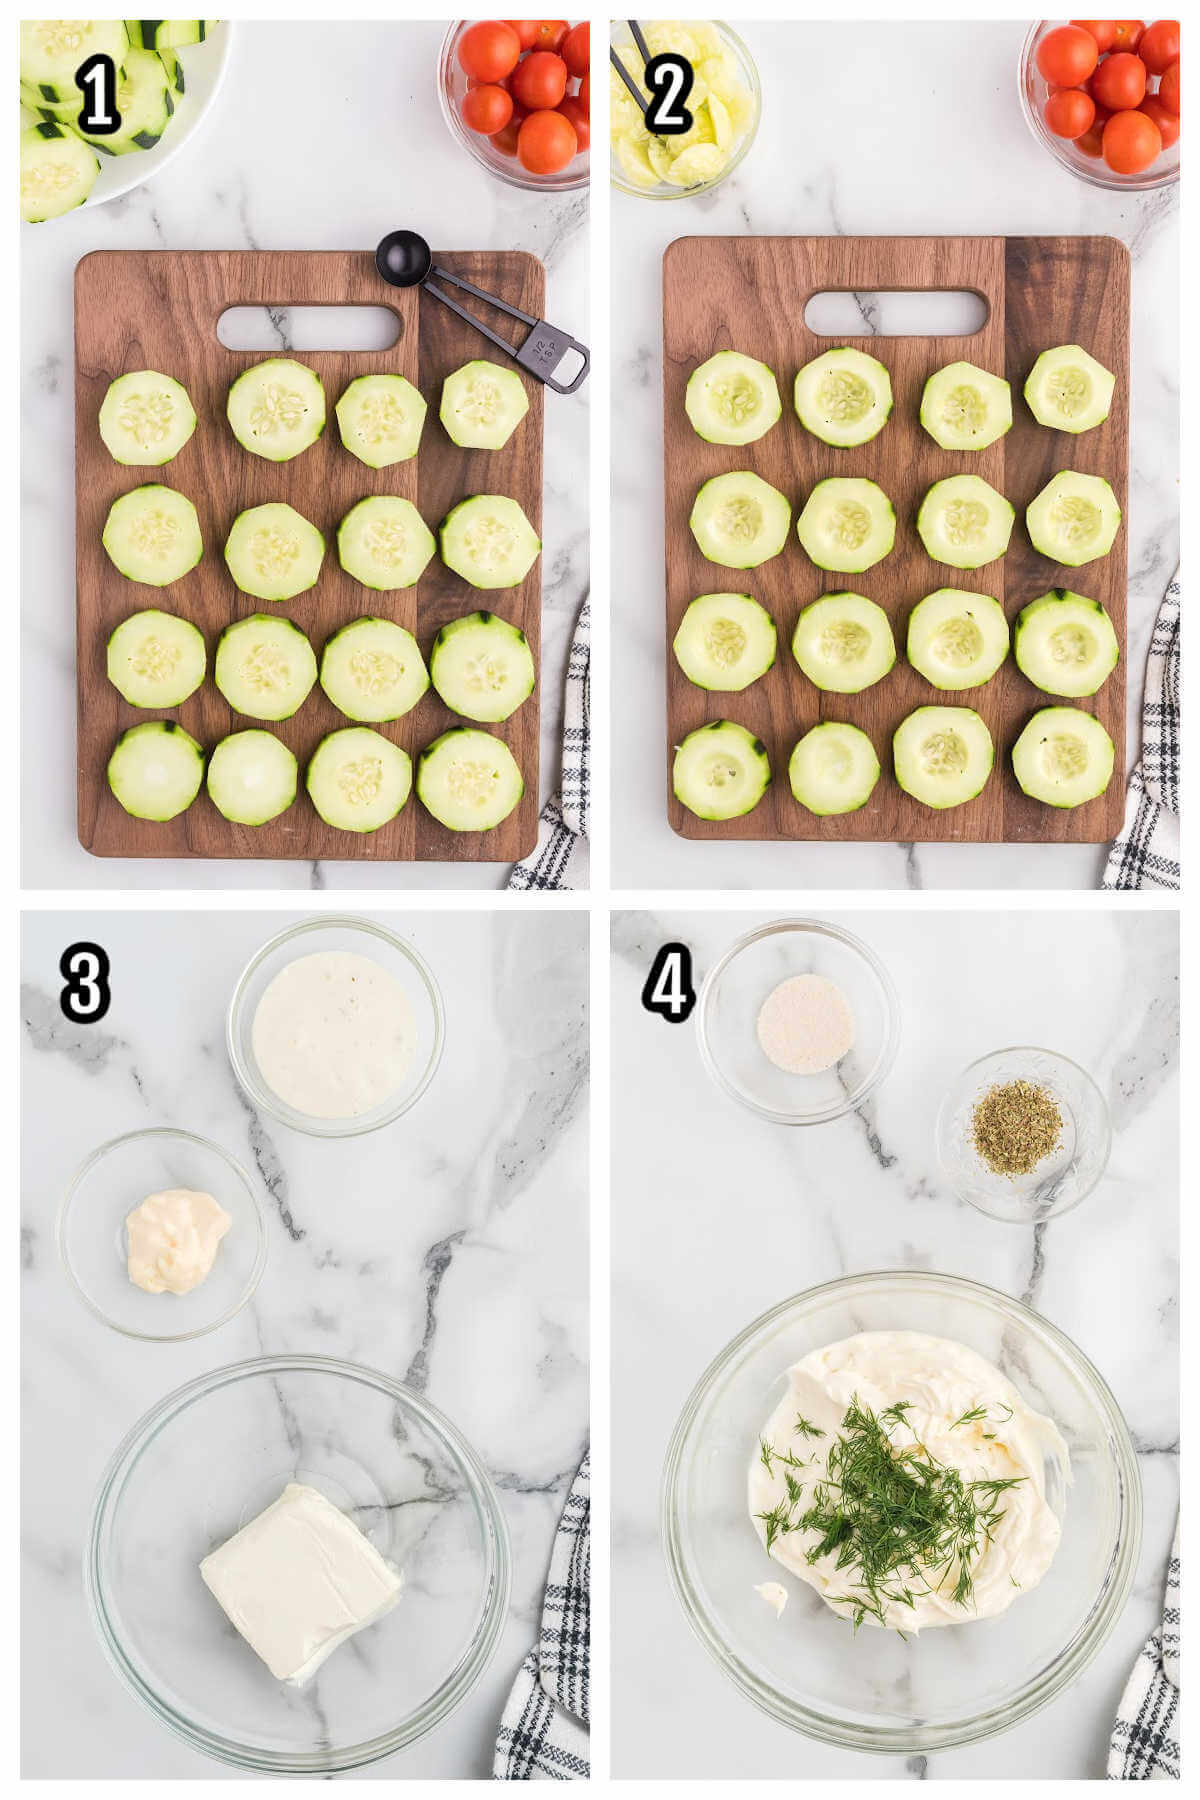 First set of steps for making the cucumber appetizers. 